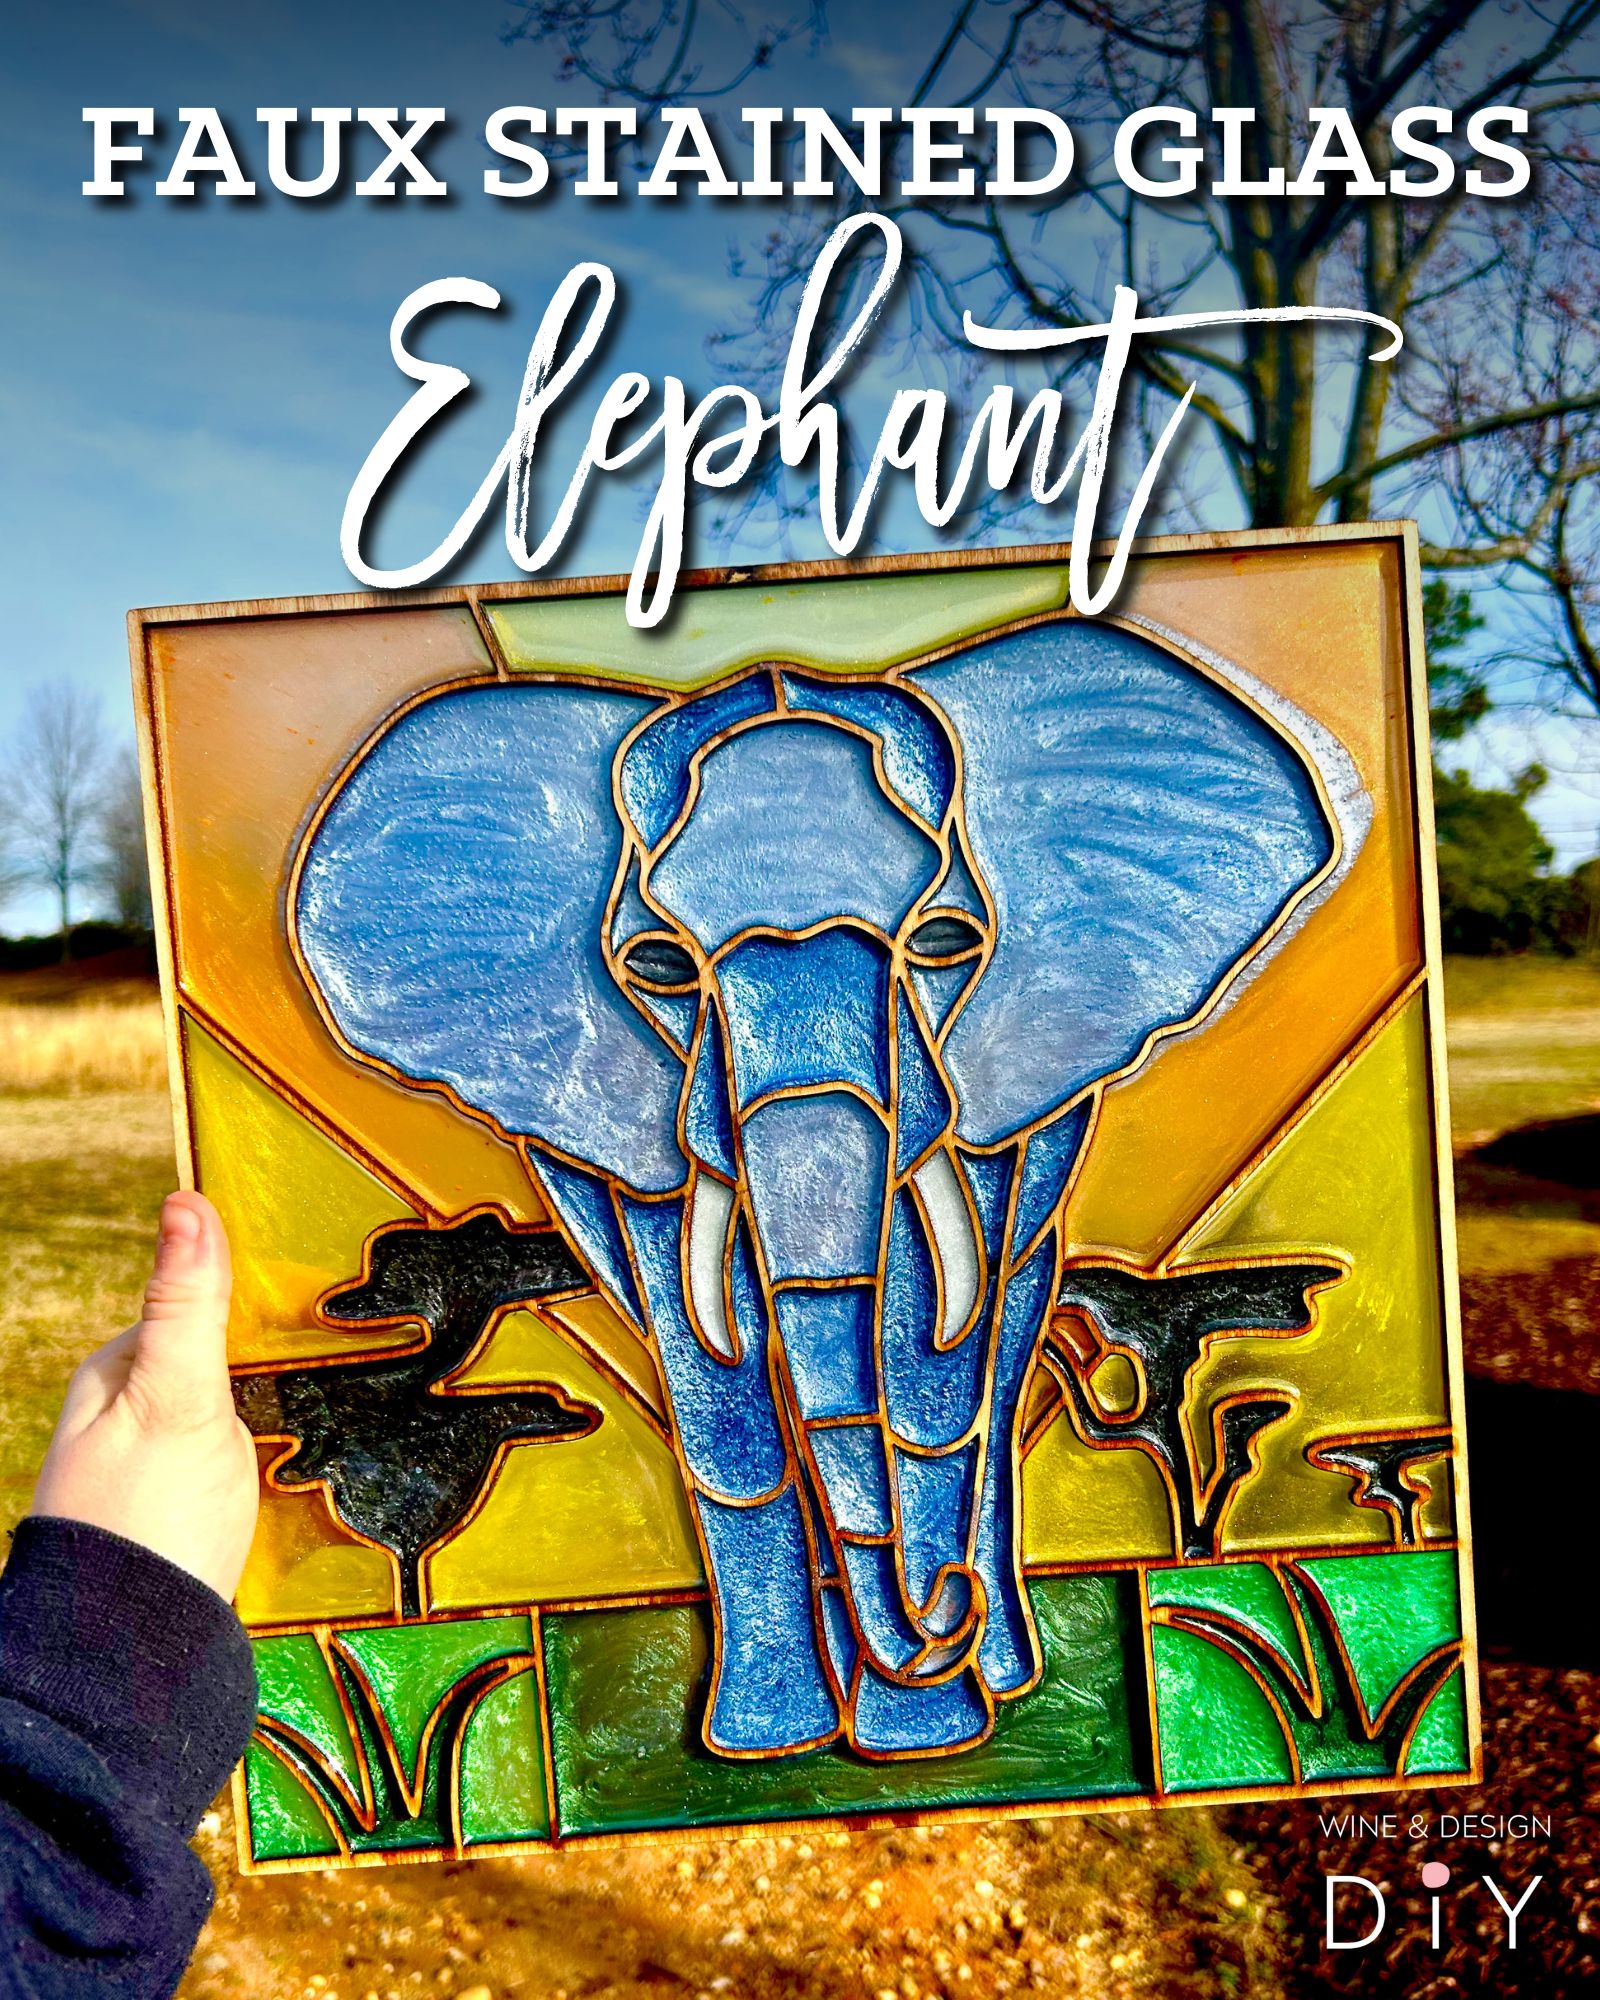 FAUX Stained Glass Elephant